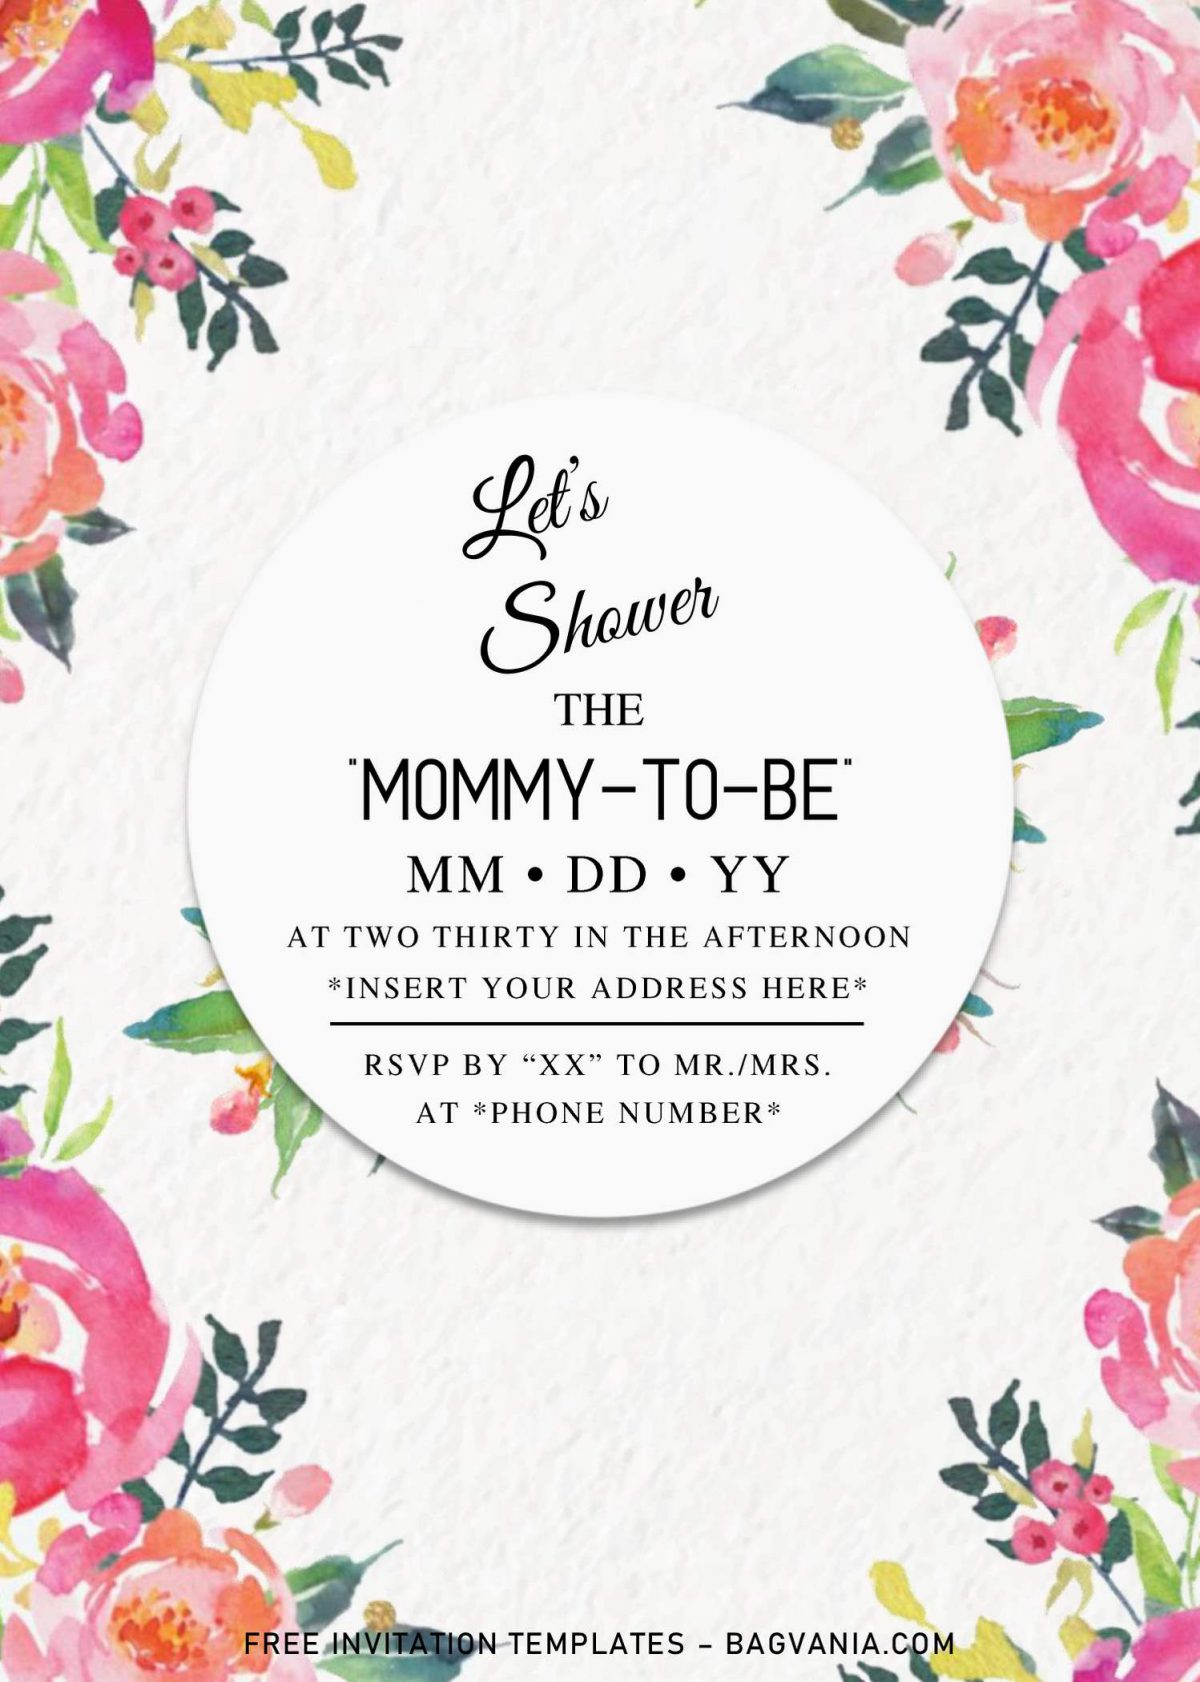 Free Summer Garden Baby Shower Invitation Templates Here and has floral border